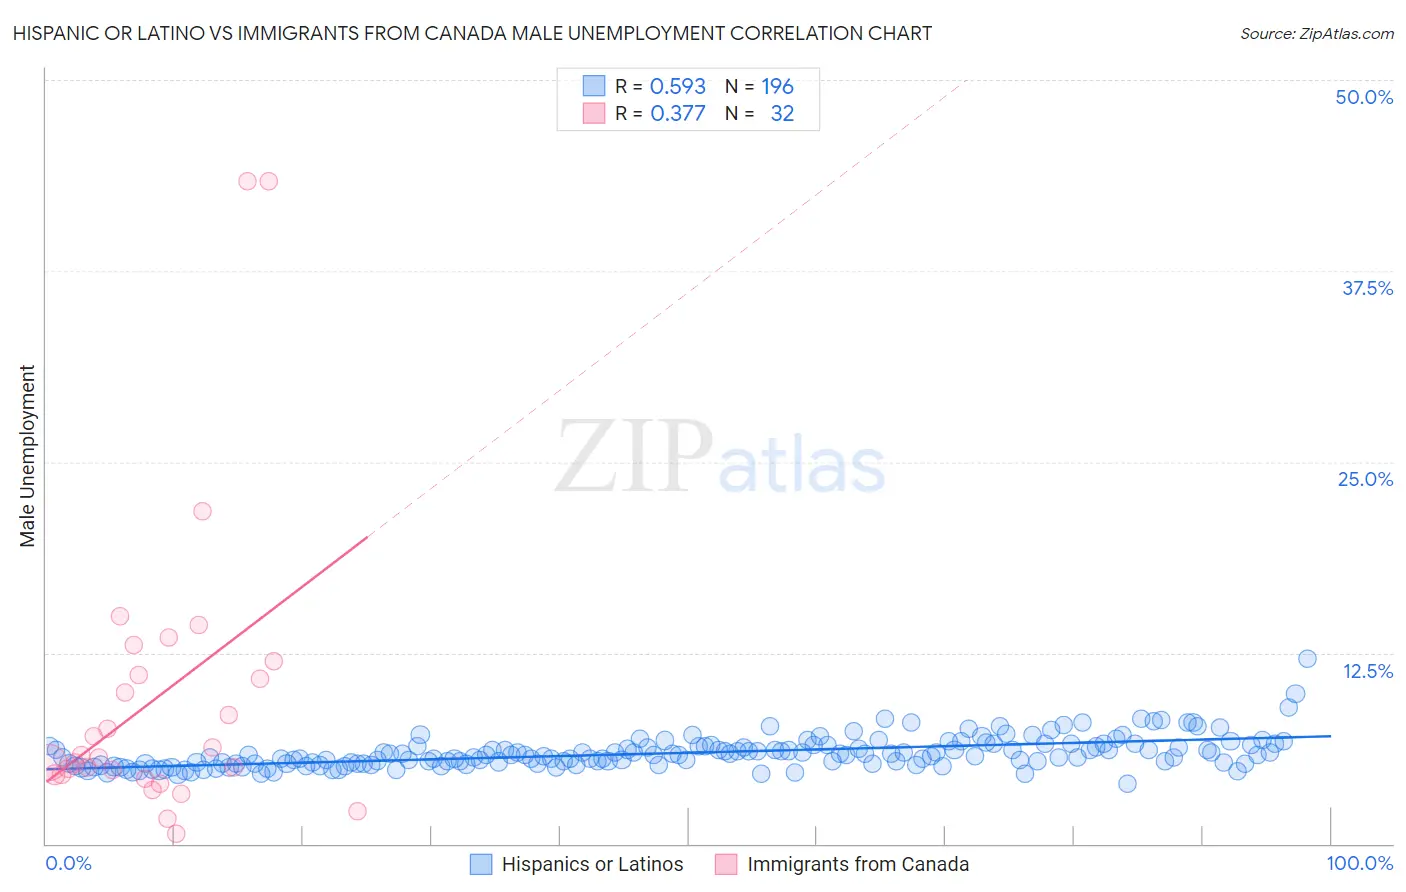 Hispanic or Latino vs Immigrants from Canada Male Unemployment